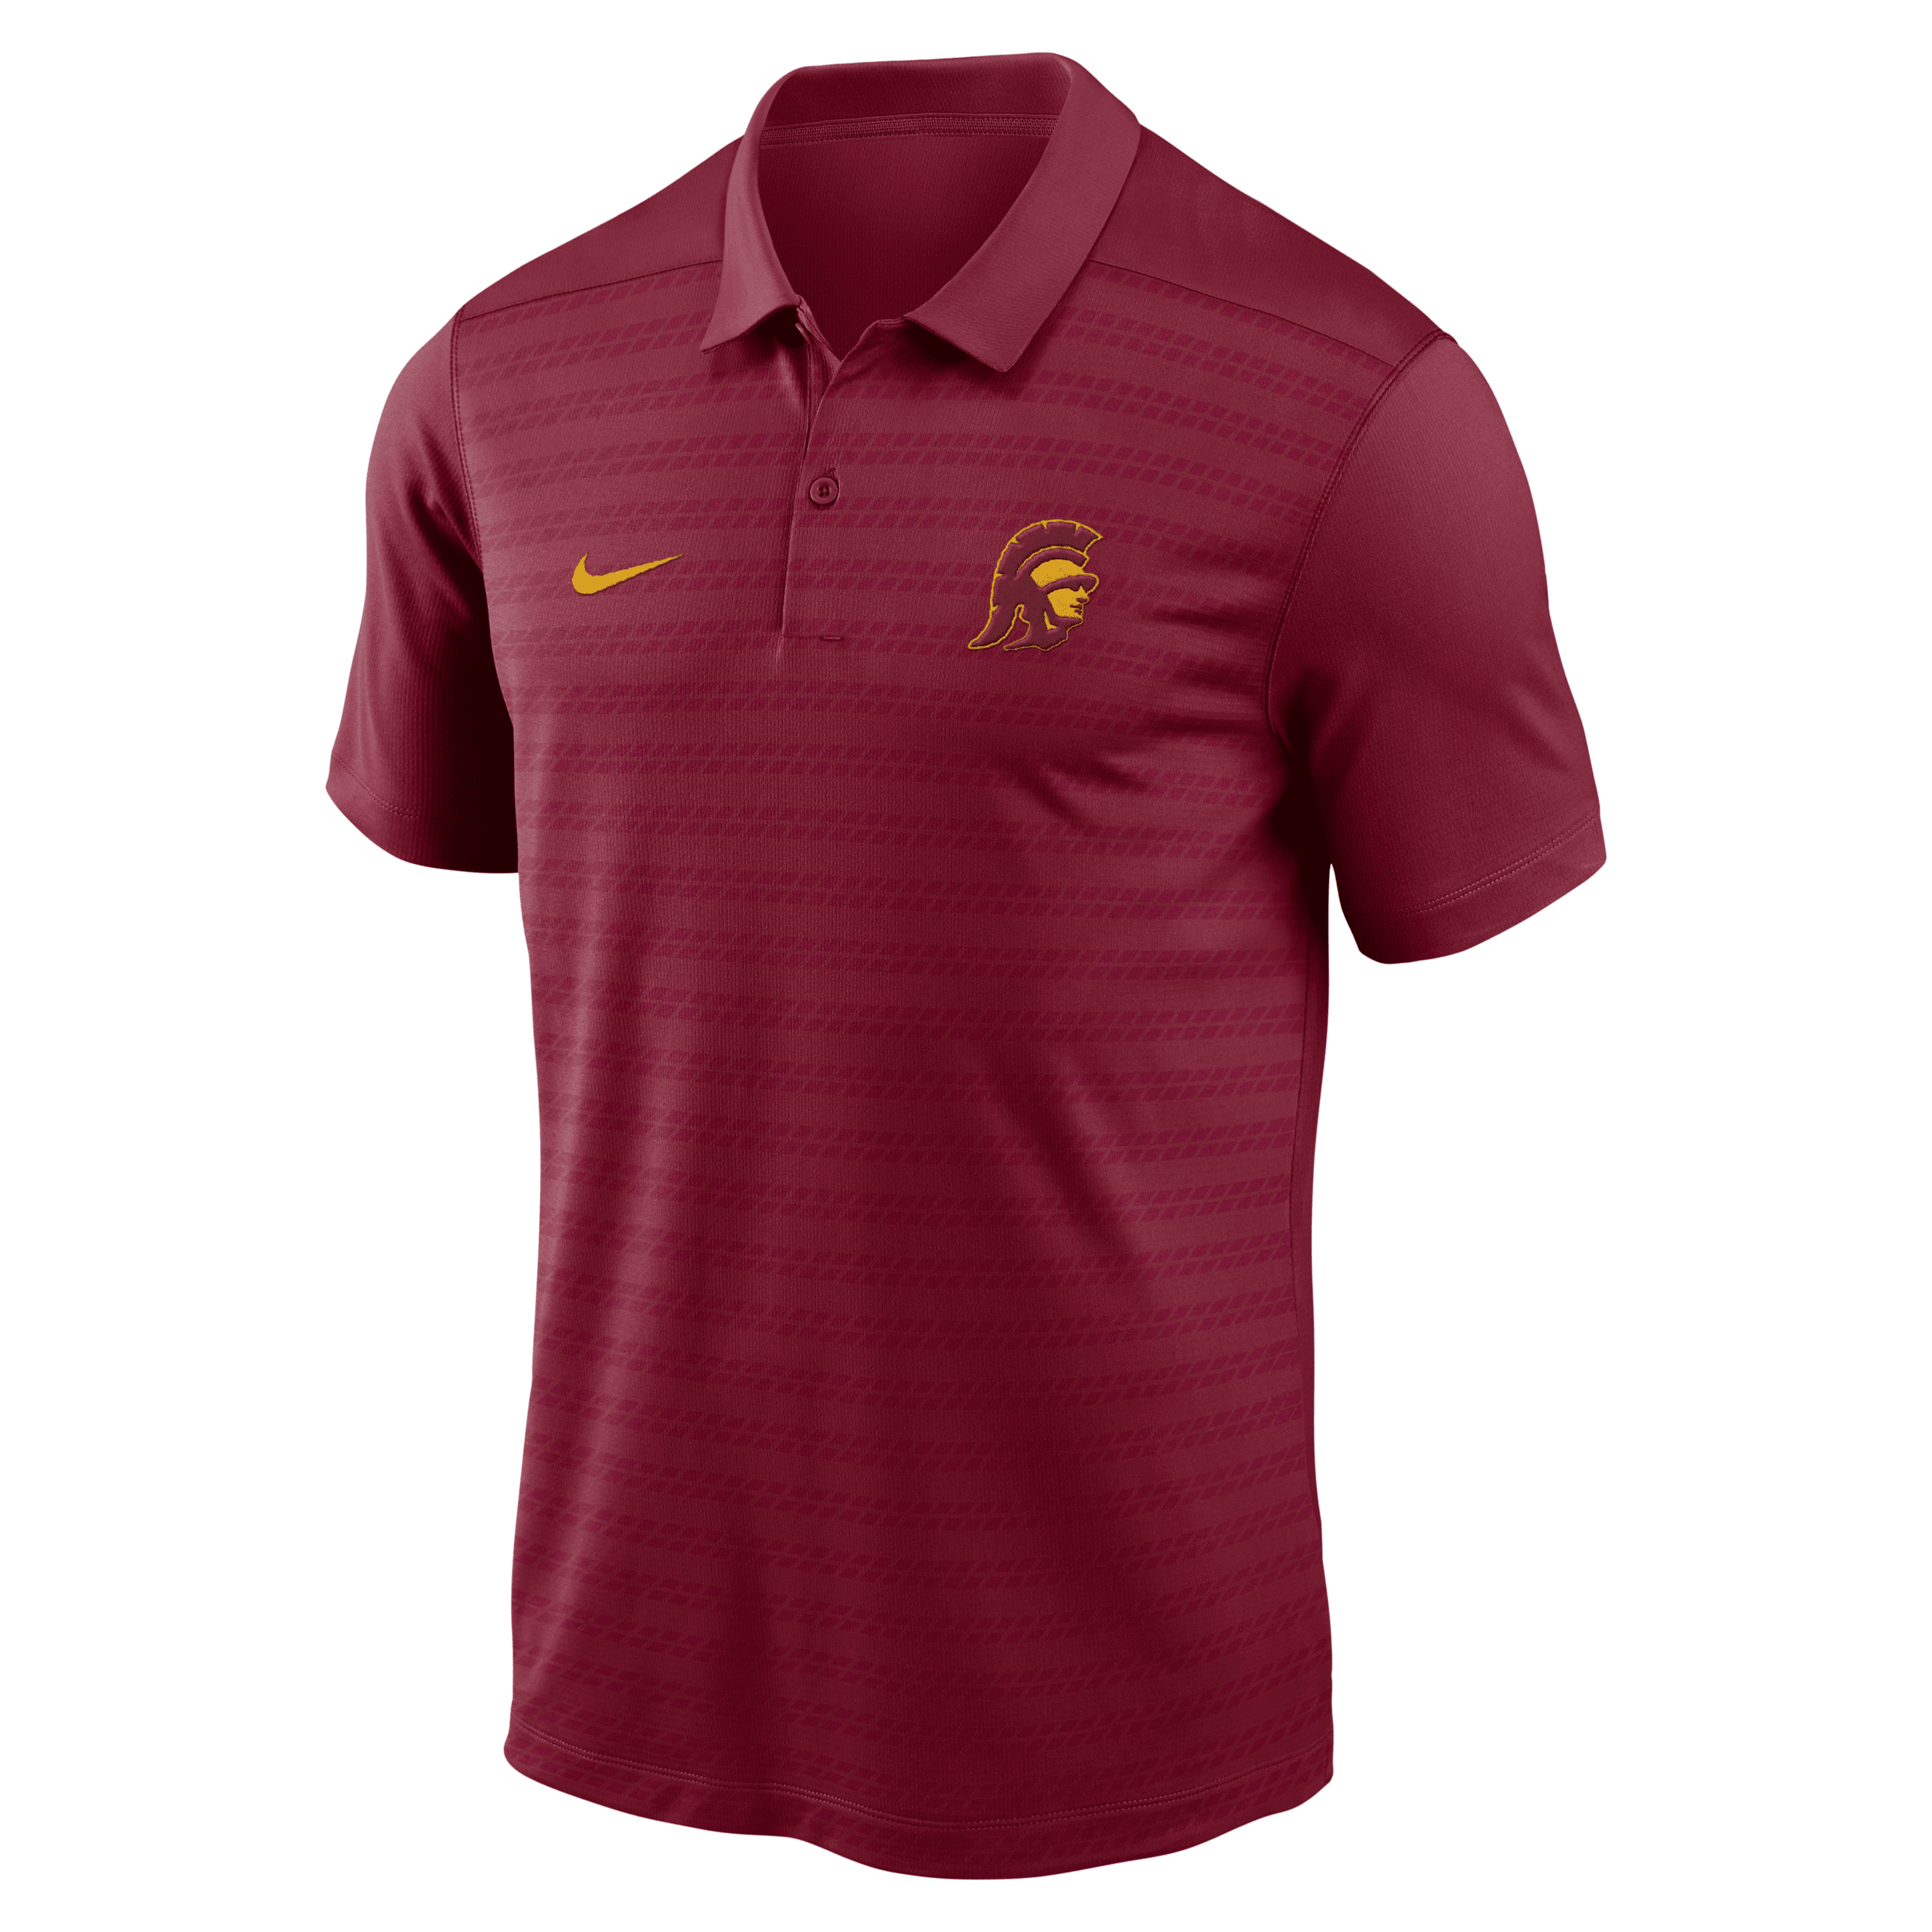 Nike Usc Trojans Sideline Victory  Men's Dri-fit College Polo In Red